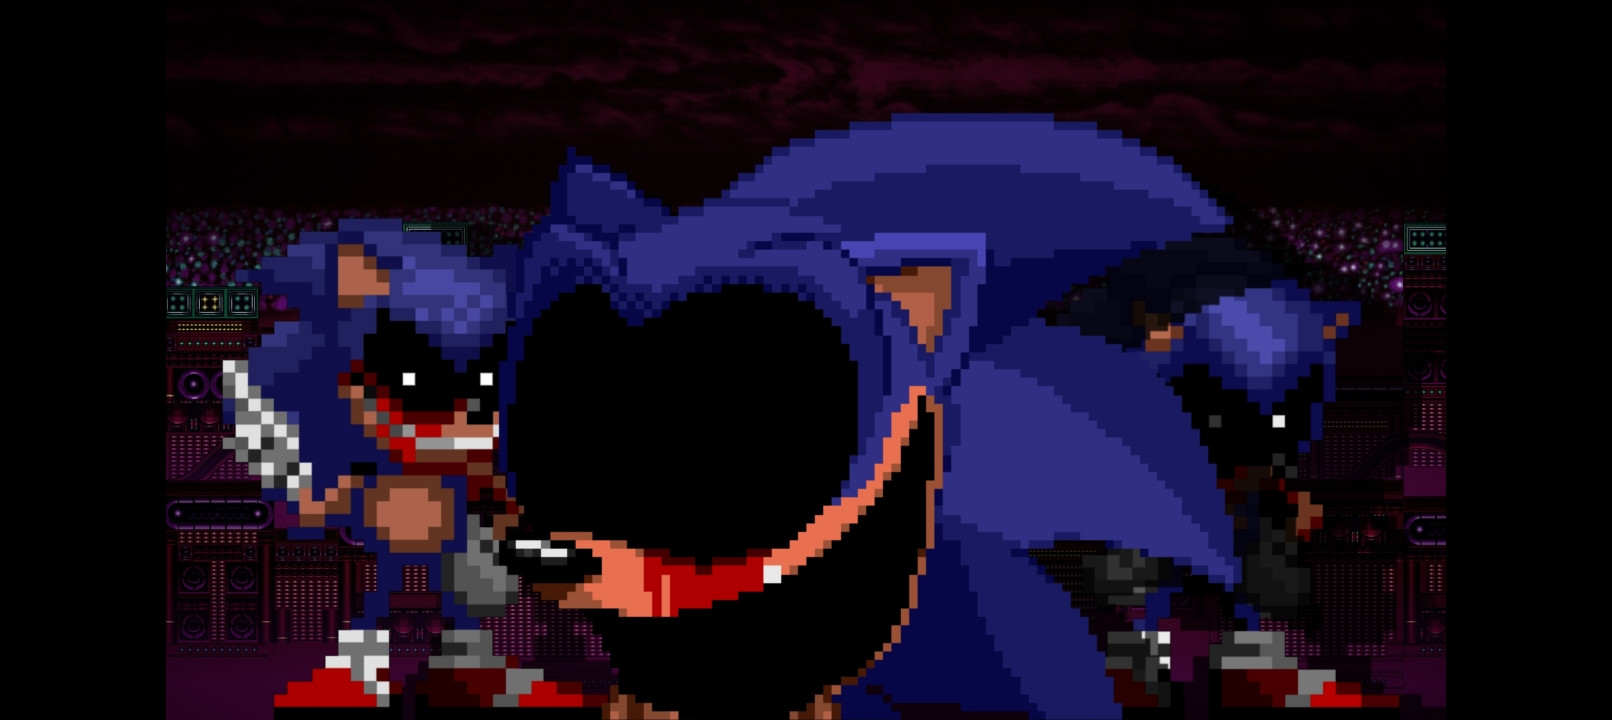 This shows how fucking similar The Mario.exe Mod is to Sonic.exe